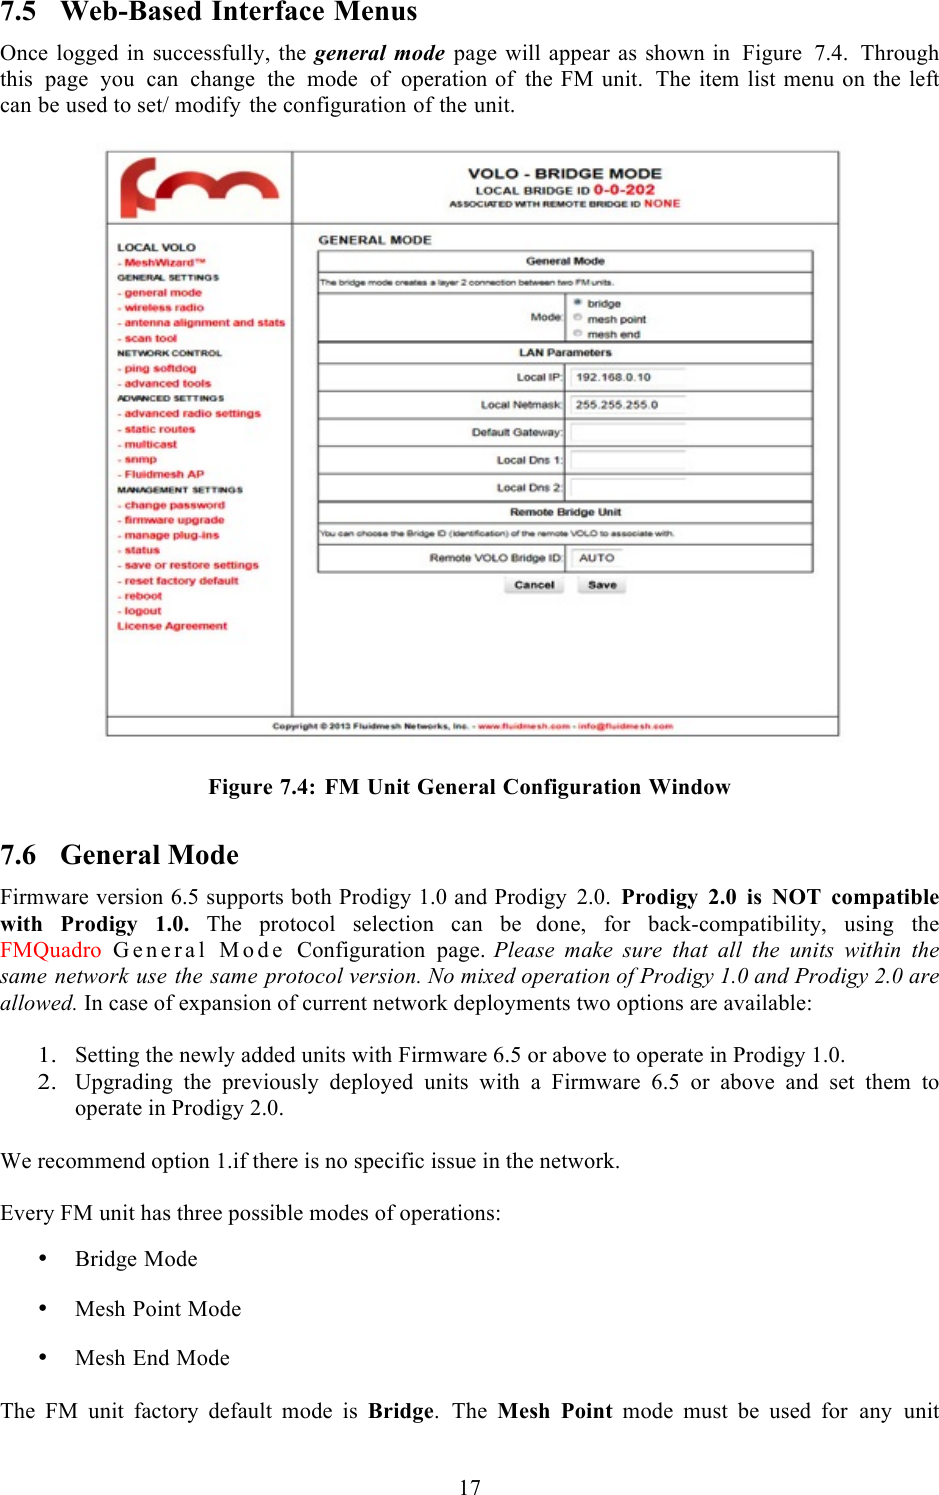  17  7.5 Web-Based Interface Menus Once logged in successfully, the general mode page will appear as shown in Figure 7.4. Through this page you can change the mode of operation of the FM unit. The item list menu on the left can be used to set/ modify the configuration of the unit.     Figure 7.4: FM Unit General Configuration Window 7.6 General Mode Firmware version 6.5 supports both Prodigy 1.0 and Prodigy 2.0.  Prodigy 2.0 is NOT compatible with Prodigy 1.0. The protocol selection can be  done, for back-compatibility, using the FMQuadro General Mode Configuration page. Please make sure that all the units within the same network use the same protocol version. No mixed operation of Prodigy 1.0 and Prodigy 2.0 are allowed. In case of expansion of current network deployments two options are available:  1. Setting the newly added units with Firmware 6.5 or above to operate in Prodigy 1.0. 2. Upgrading  the  previously  deployed  units  with  a  Firmware  6.5  or  above  and  set  them  to operate in Prodigy 2.0.  We recommend option 1.if there is no specific issue in the network.   Every FM unit has three possible modes of operations:  • Bridge Mode  • Mesh Point Mode  • Mesh End Mode  The FM unit factory  default mode is Bridge.  The Mesh Point  mode must be used  for any unit 